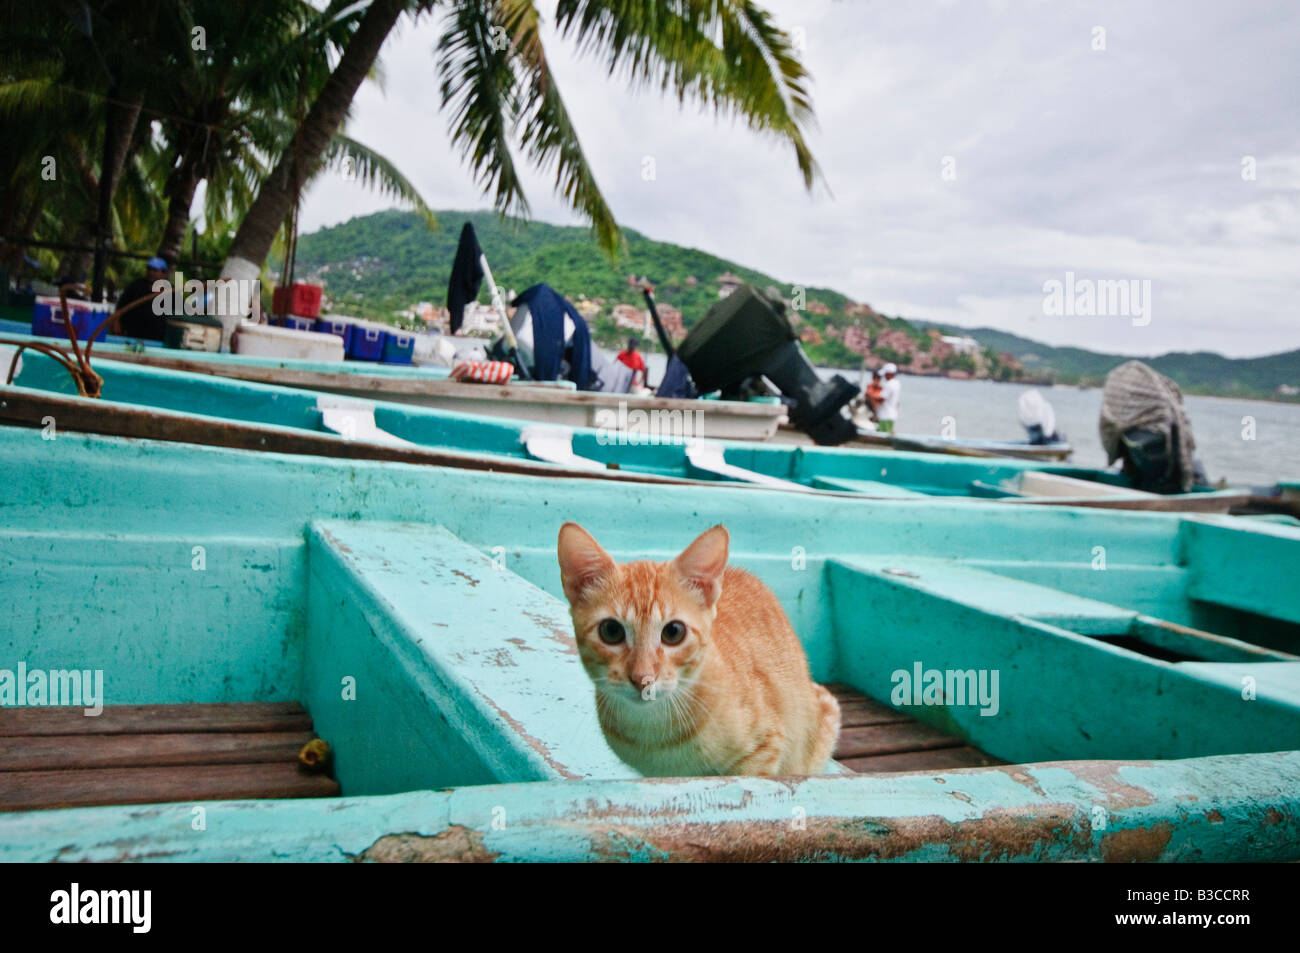 ZIHUATANEJO, Mexico - Cat at the fish market on the beach at Zihuatanejo, Mexico. The fish market on the beach at Playa Principal, Zihuatanejo, Mexico. When the local fisherman return about dawn, they sell their catches at a beach fish market to early morning buyers. Being a traditional fishing village, the seafood in Zihuatanejo is superb. Stock Photo